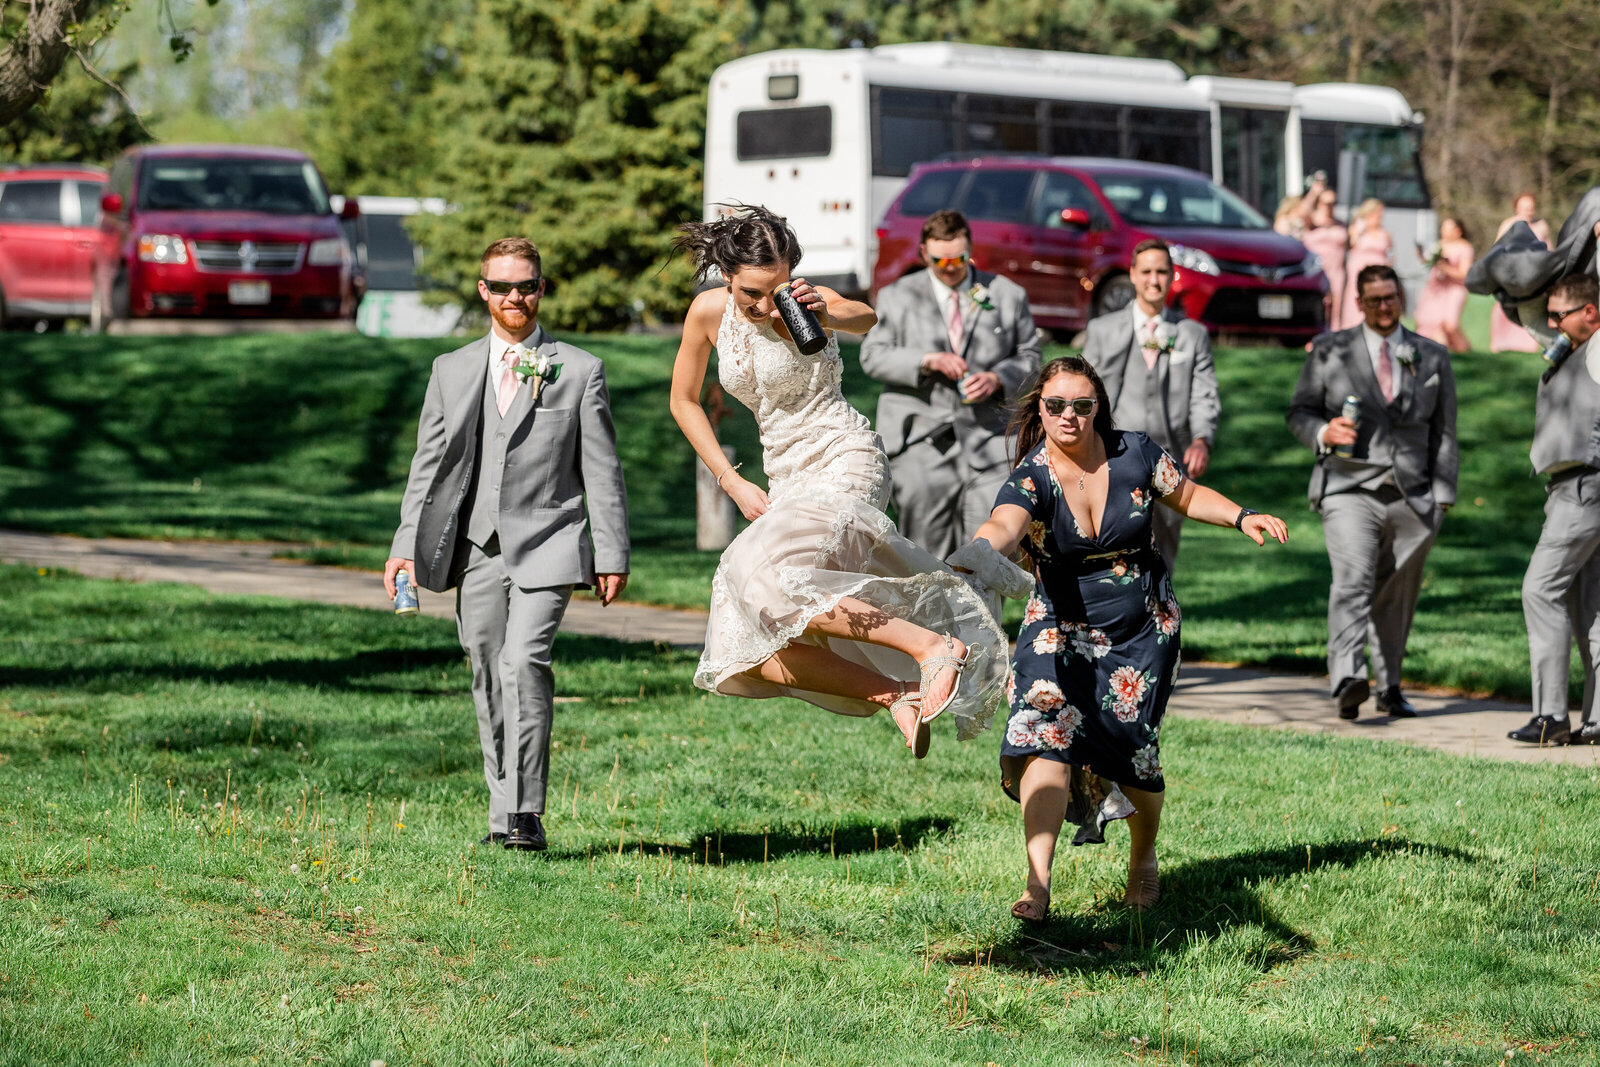 Bride jumping and celebrating